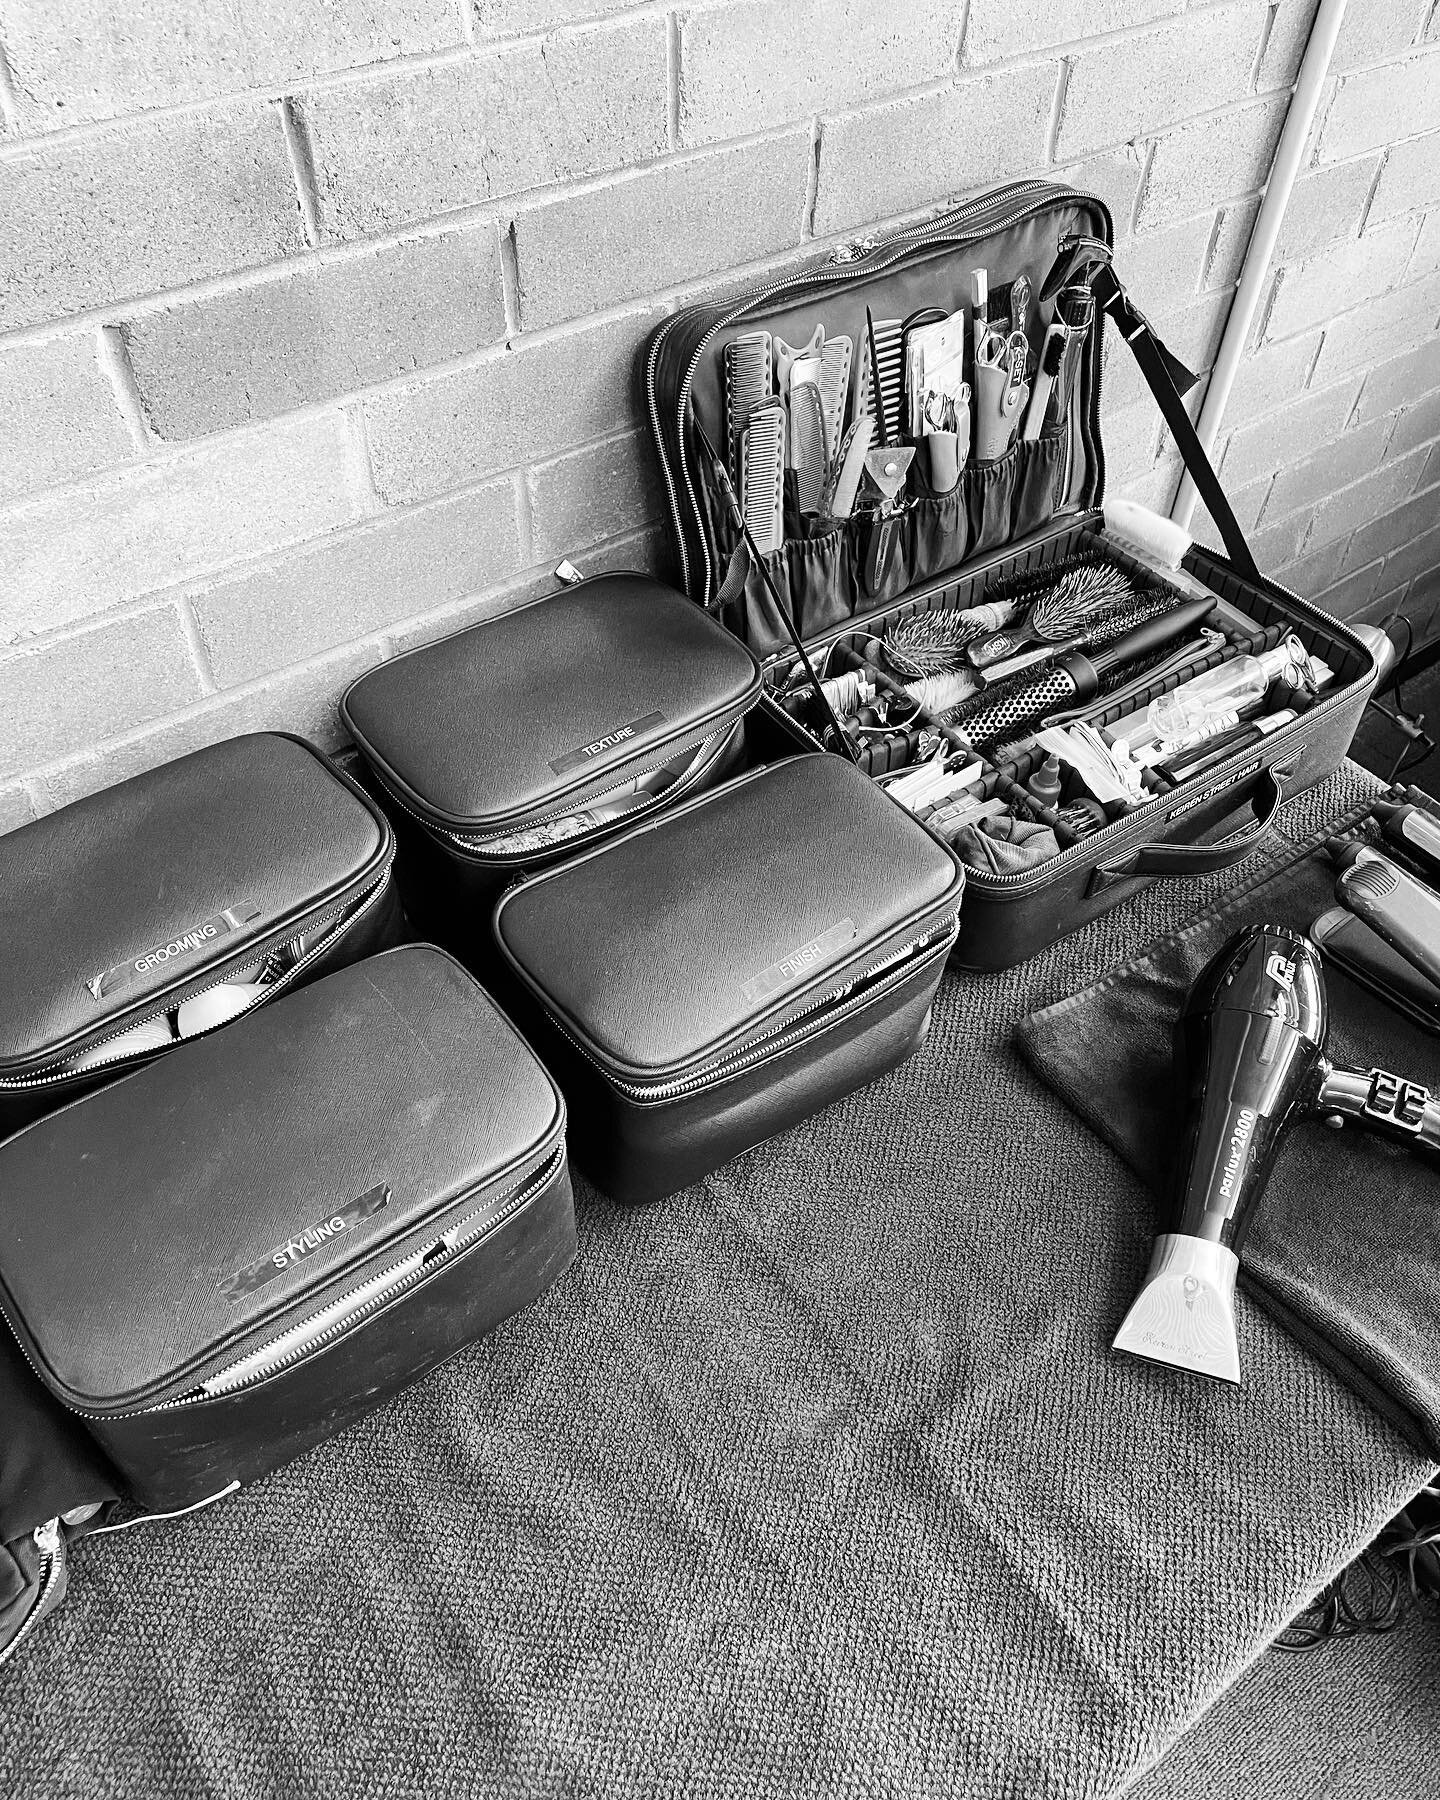 A happy work situation with @keirenstreethair 👌🏻

Set up with ease @ksetbag 

K-set.com.au 

#kit 
#kibag 
#hairdresser 
#sessionstylist 
#beautykit 
#productbag 
#freelance 
#hairtool